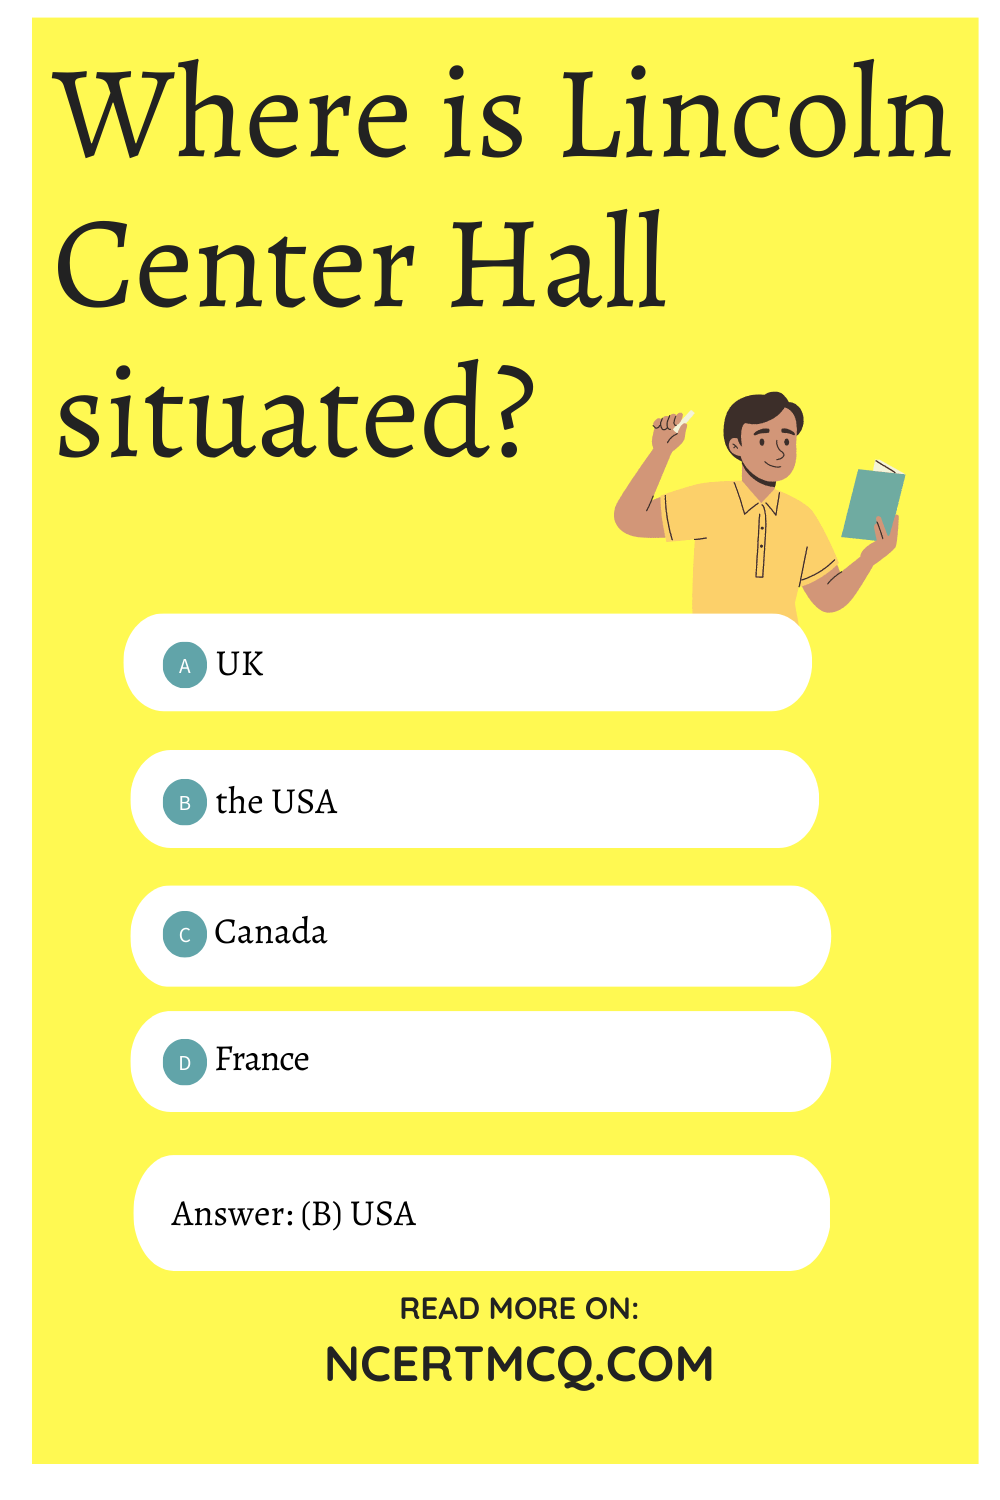 Where is Lincoln Center Hall situated?